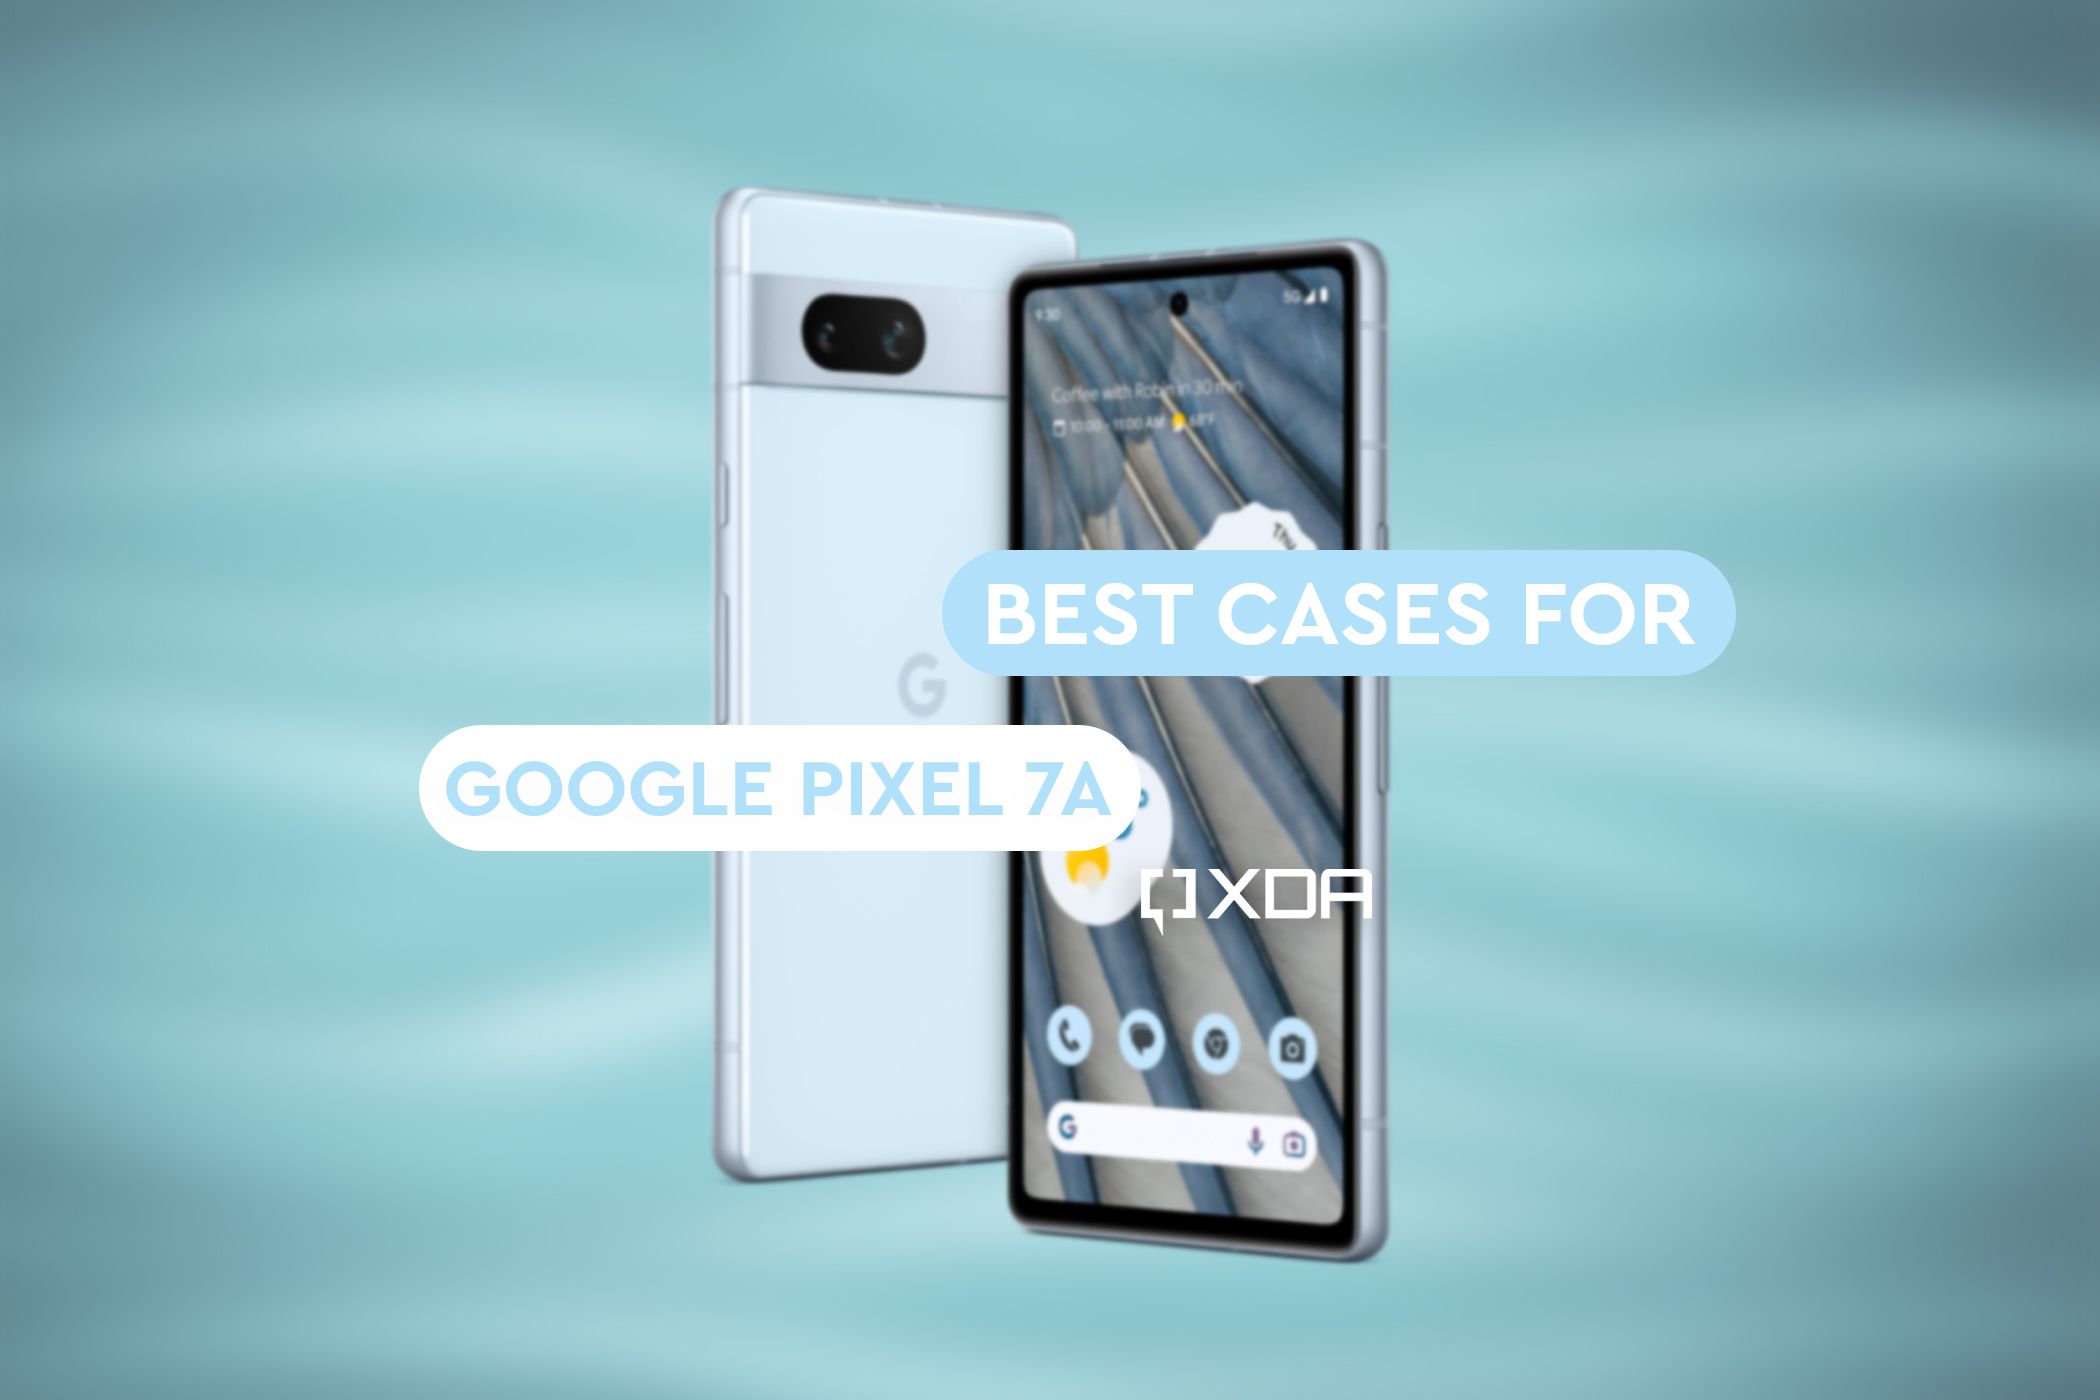 Sea Google Pixel 7a on blue textured background with Best Cases for Google Pixel 7a text and XDA logo in the foreground.